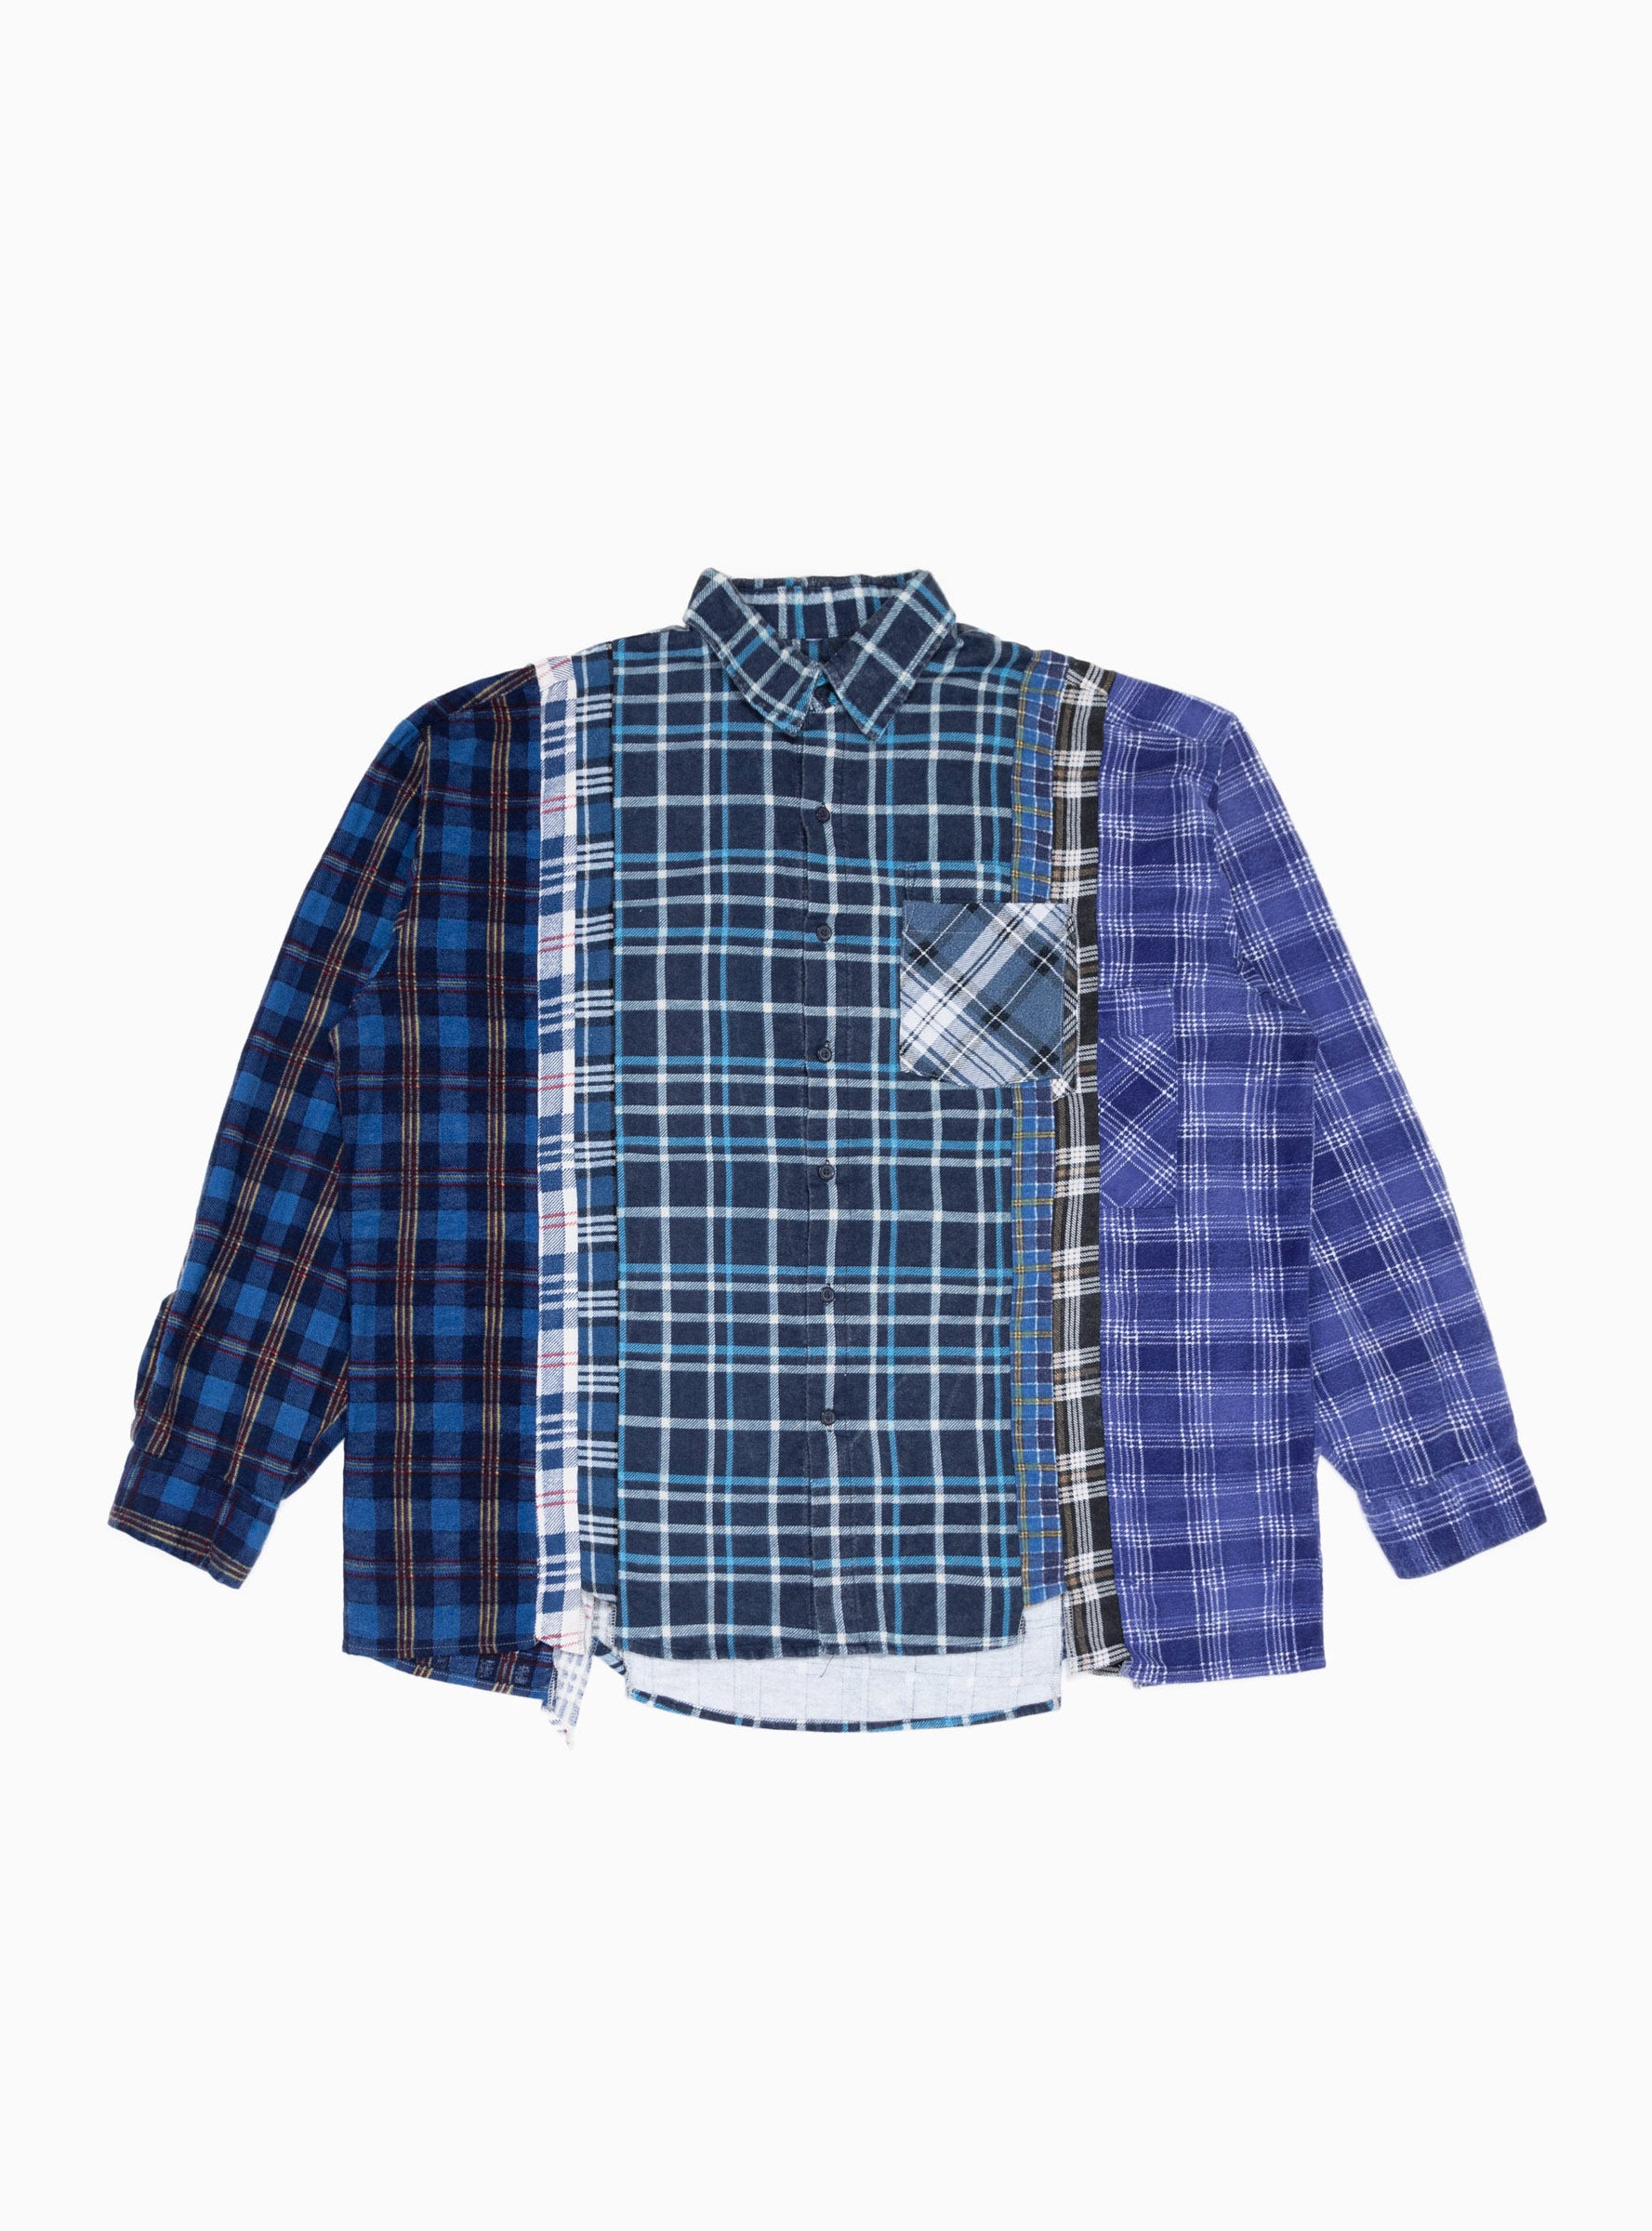 Rebuild 7 Cuts Wide Flannel Shirt Multi 4 by Needles | Couverture